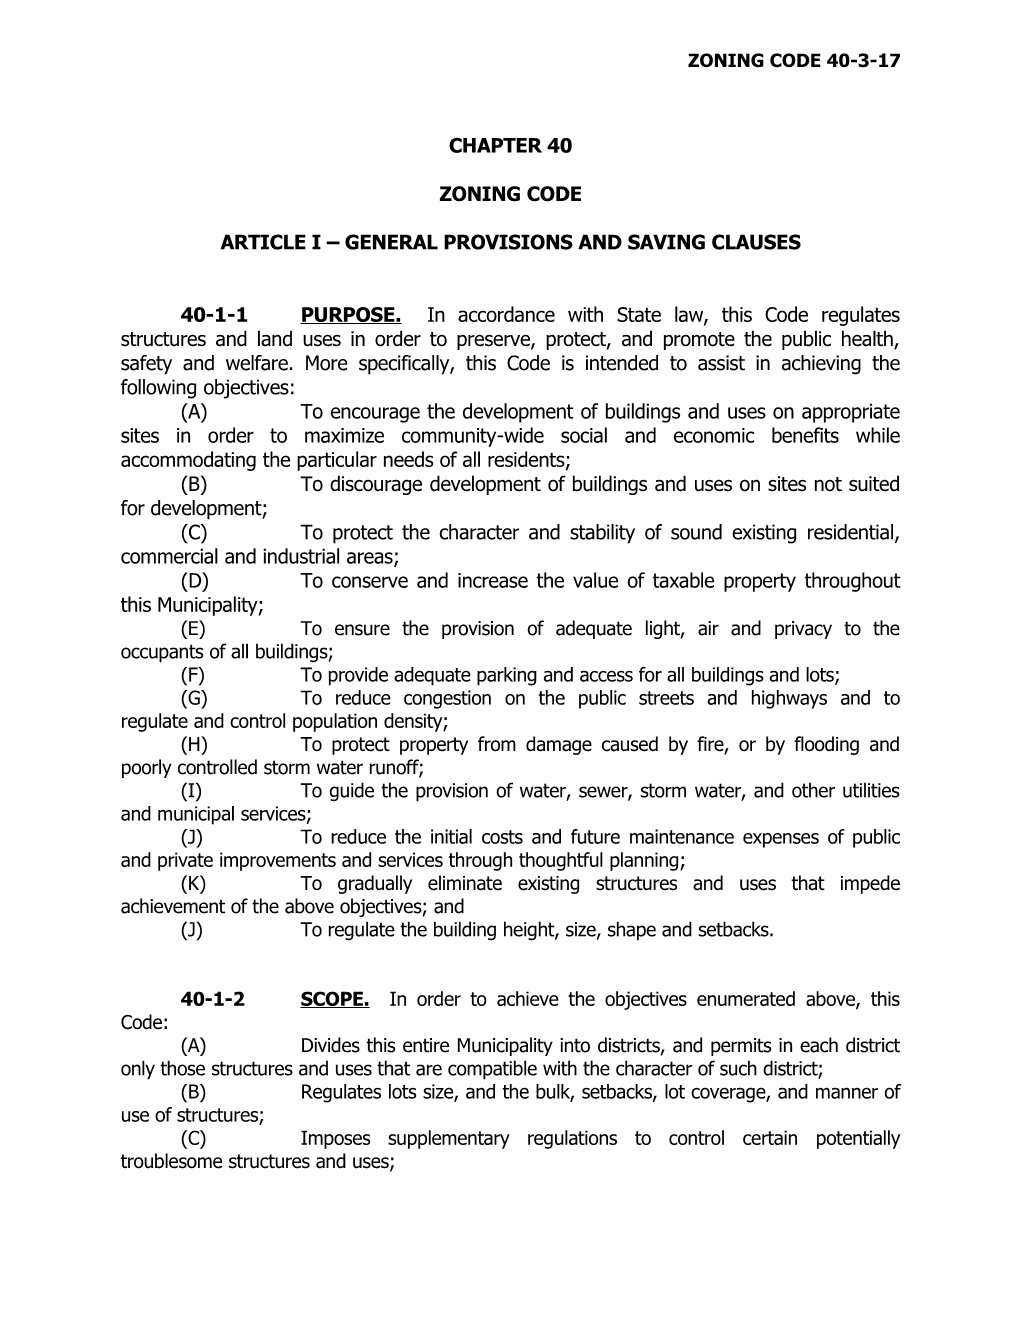 Zoning Code Article I General Provisions and Saving Clauses